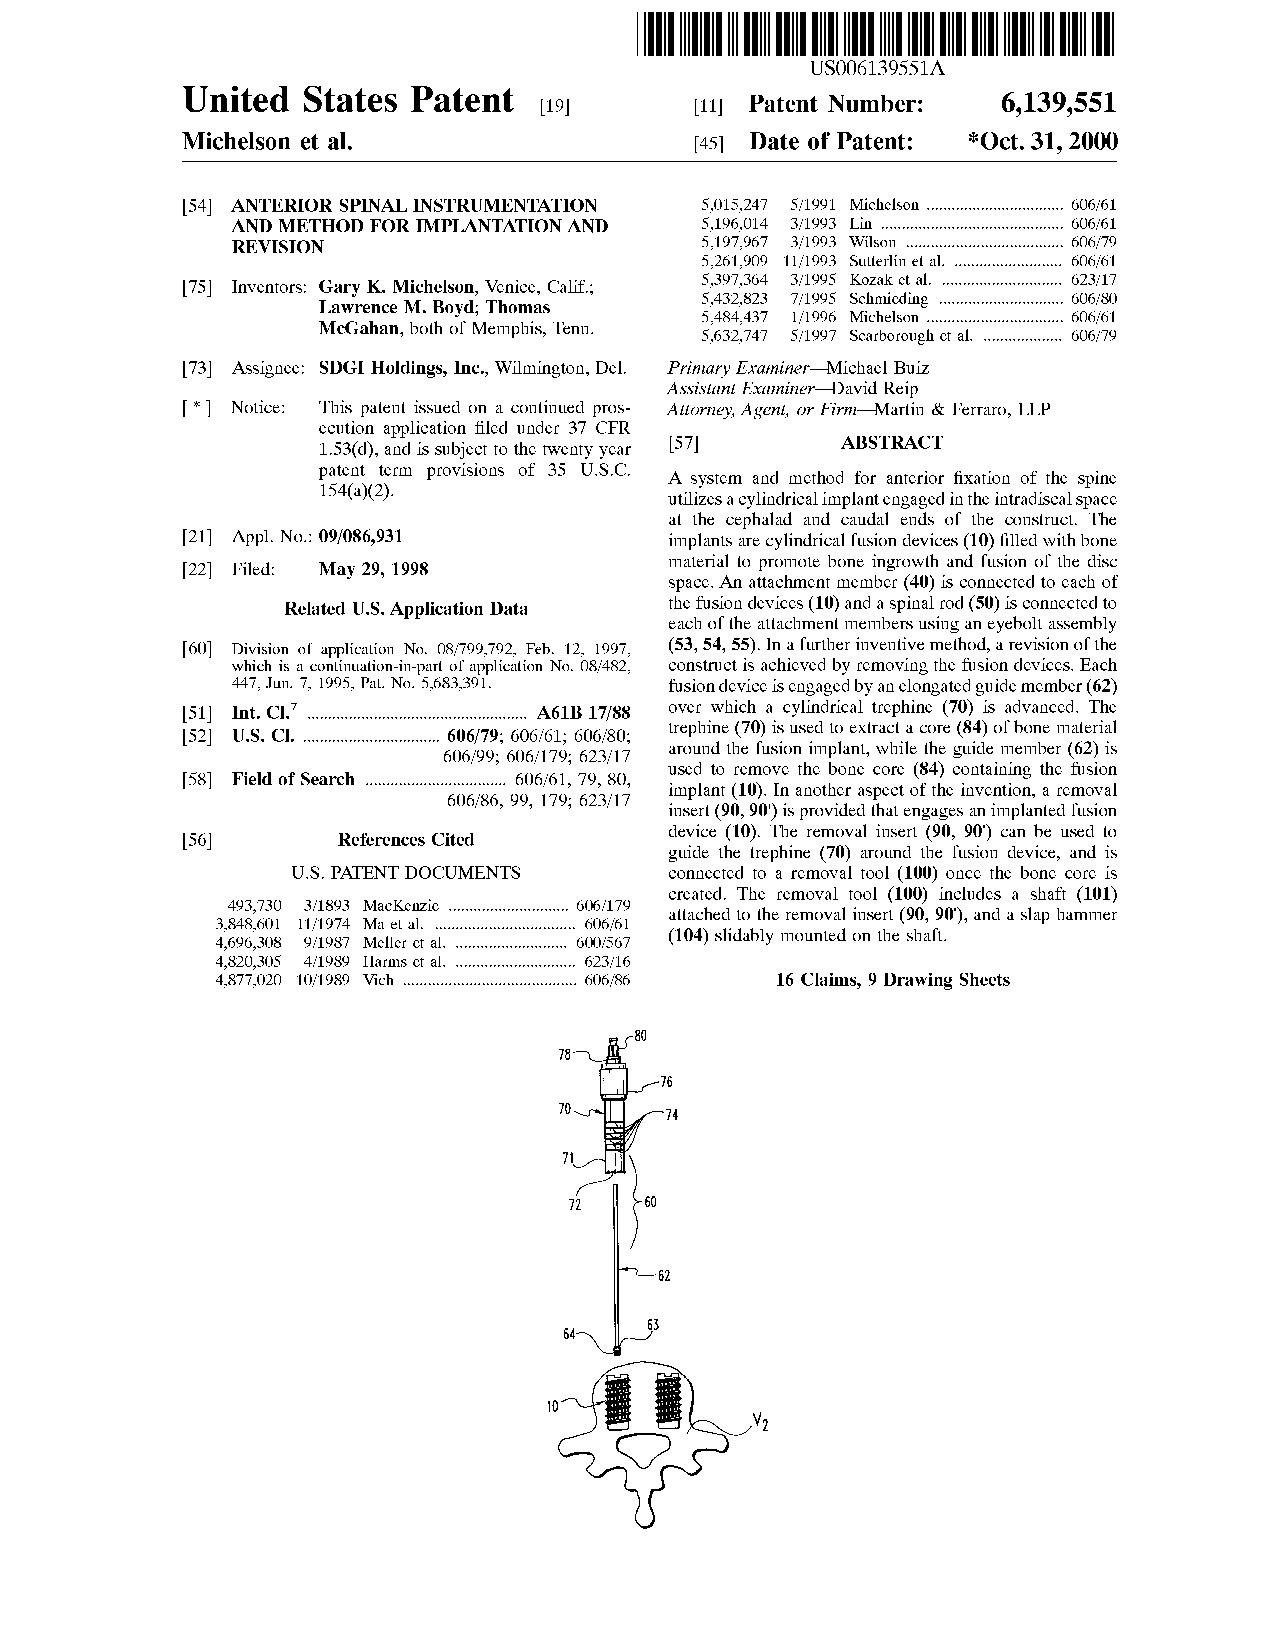 Anterior spinal instrumentation and method for implantation and revision - Patent 6,139,551